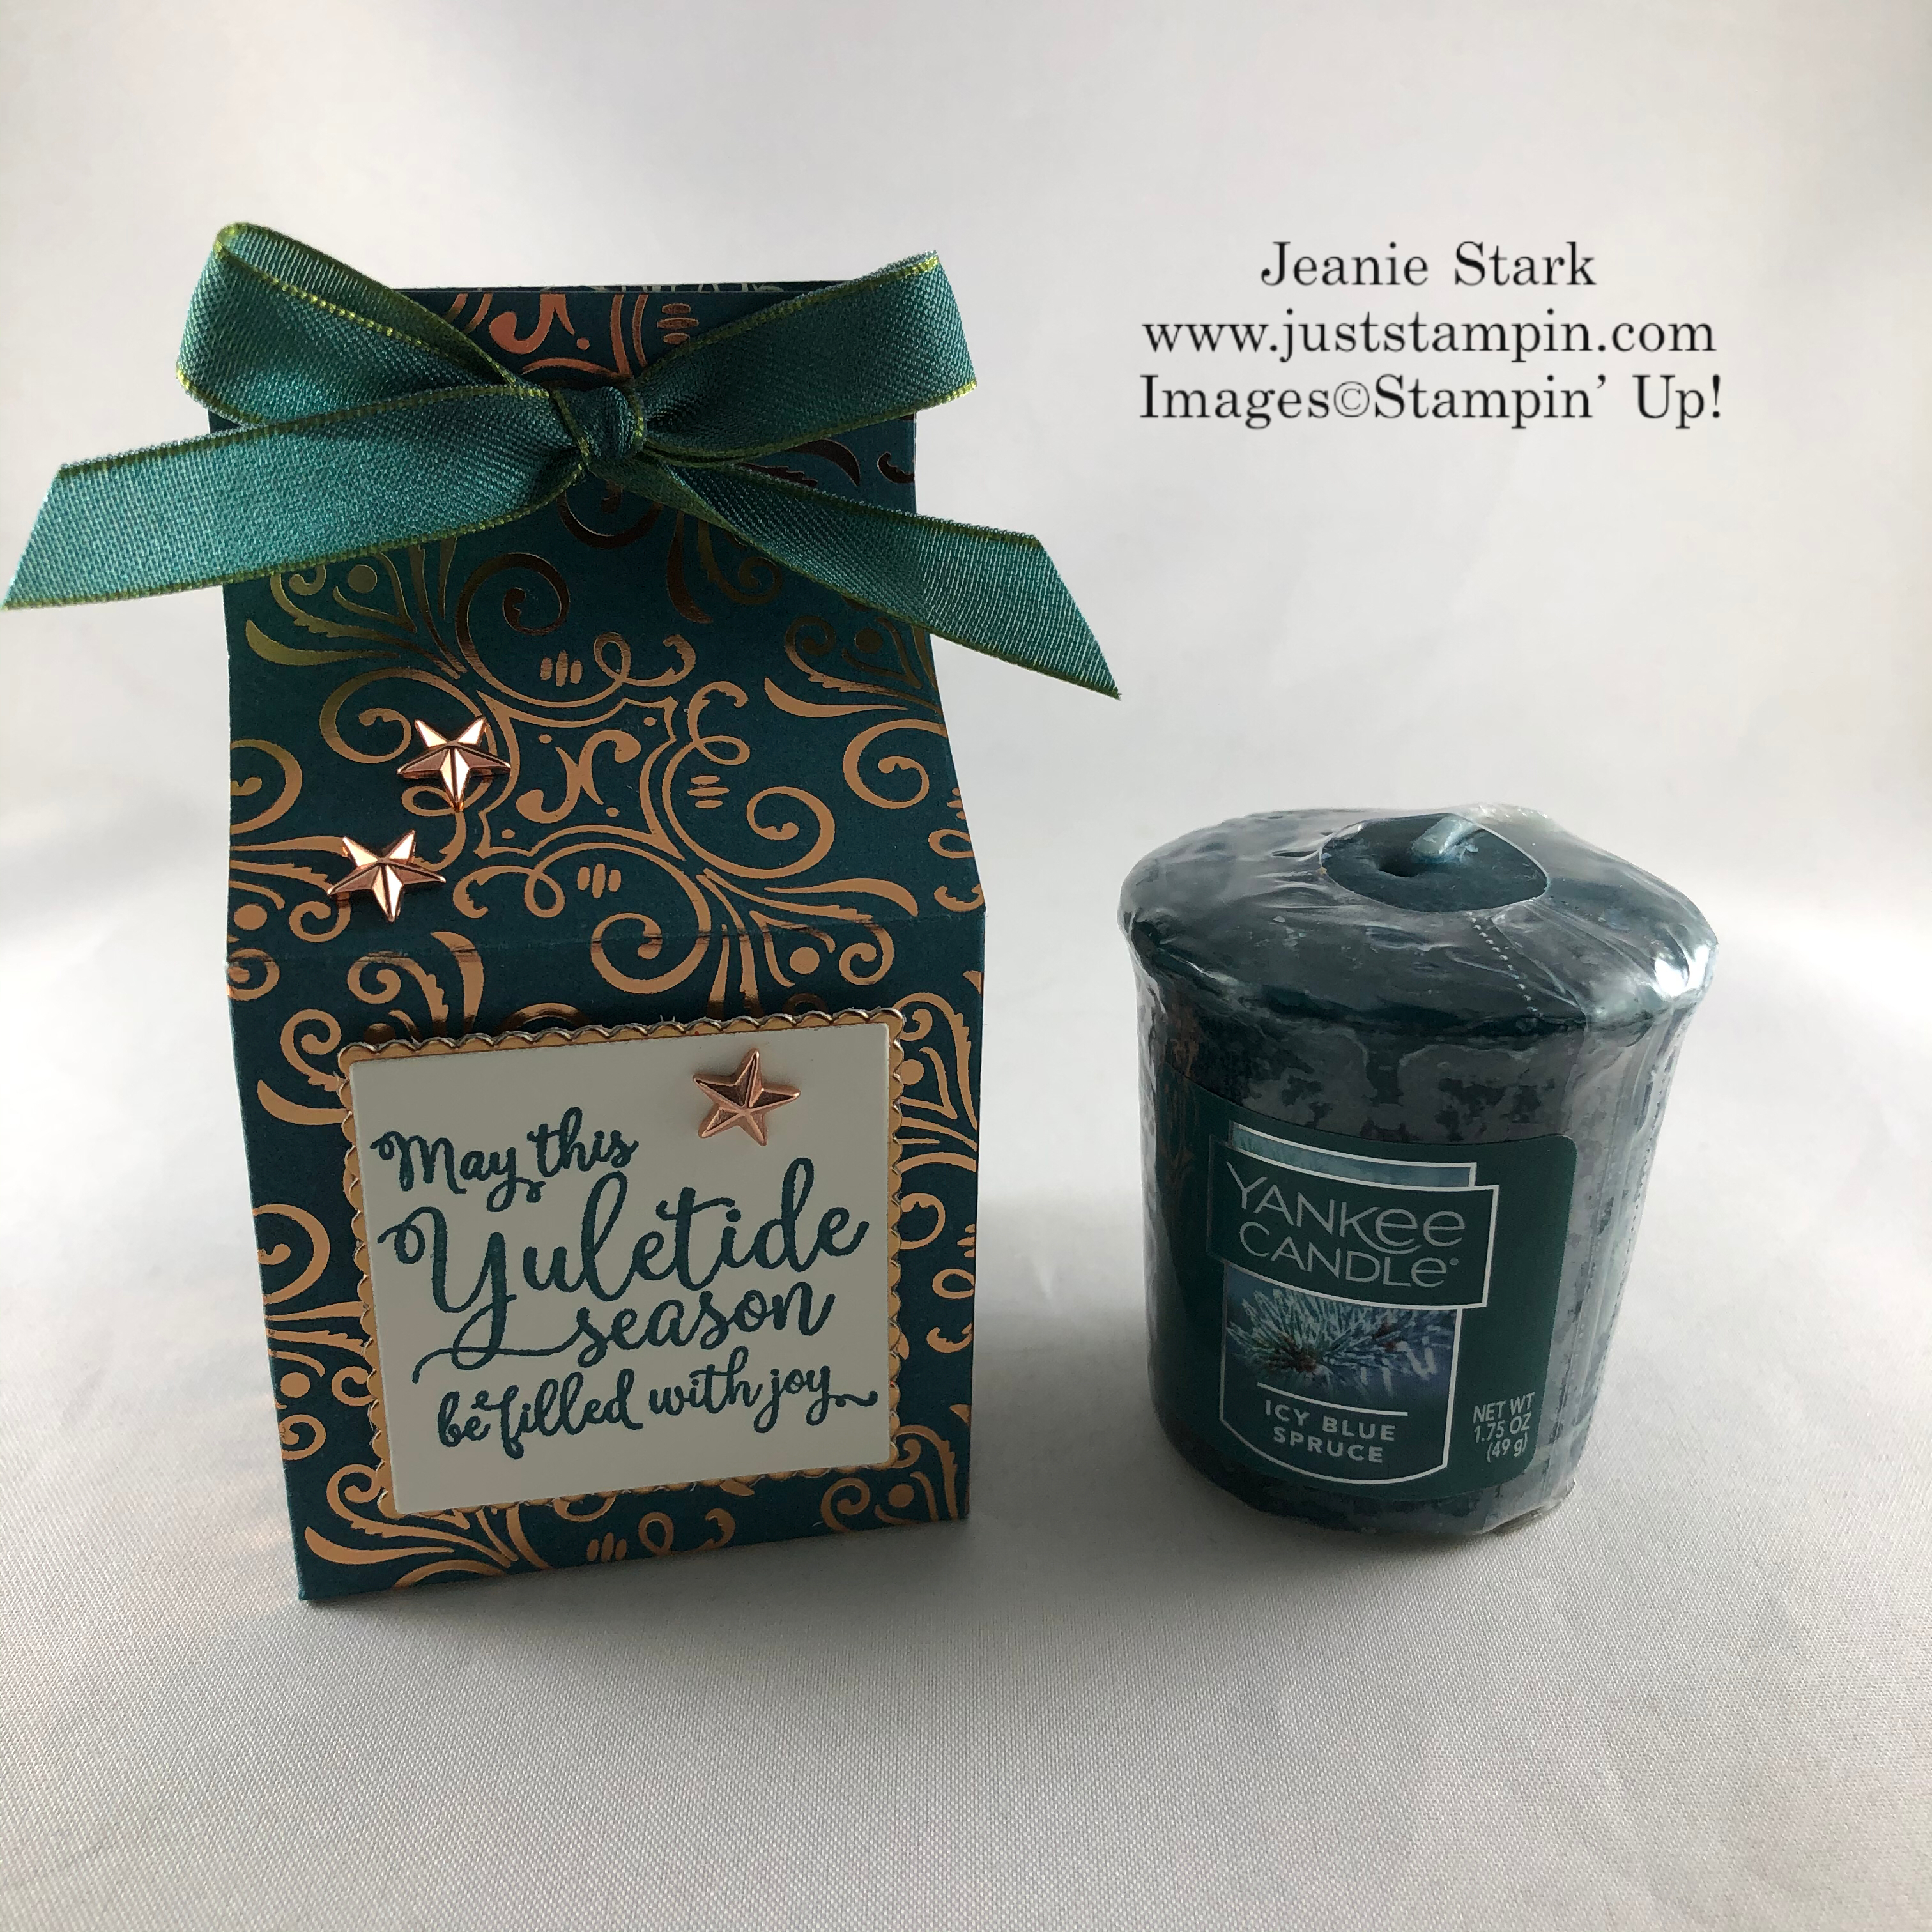 Stampin Up! Brightly Gleaming Specialty Designer Series Paper Box Idea for Yankee Candle votives - Jeanie Stark StampinUp